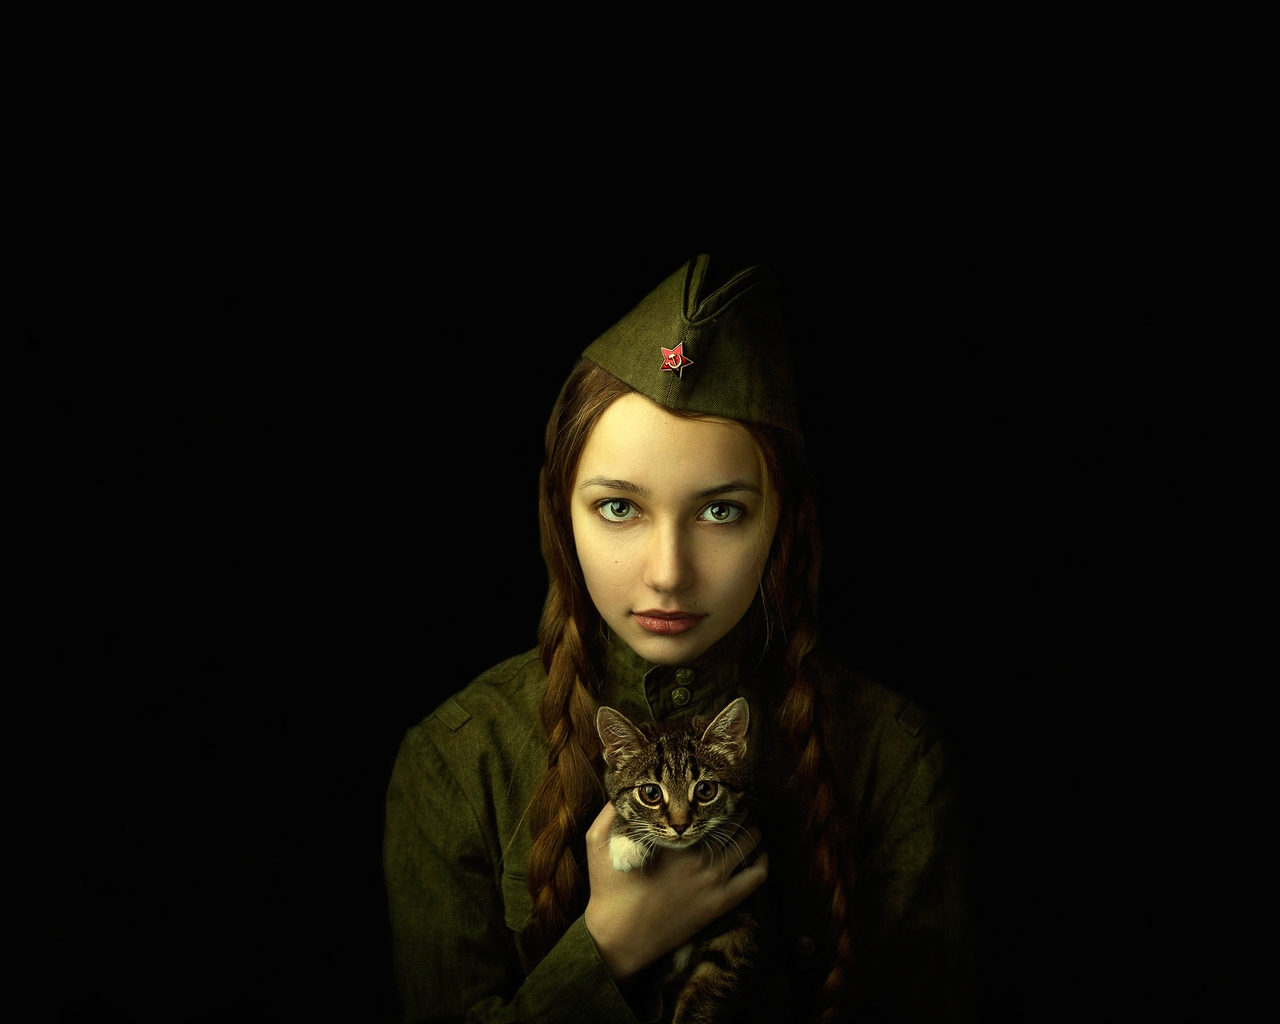 Soldier Girl Portrait for 1280 x 1024 resolution